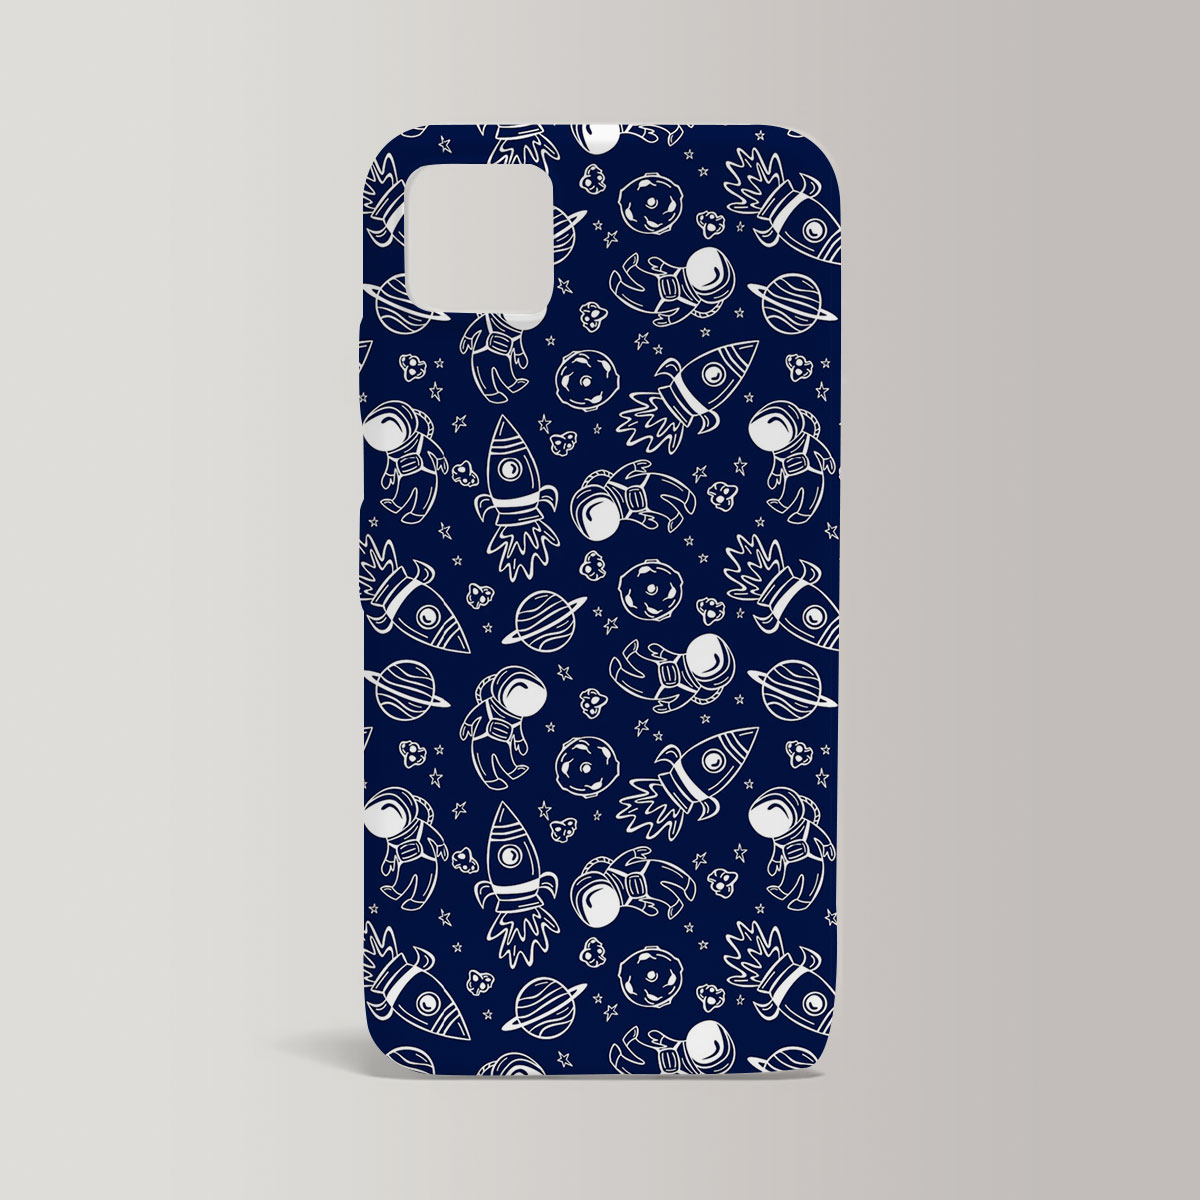 Astronaut in Doodle Style Iphone Case